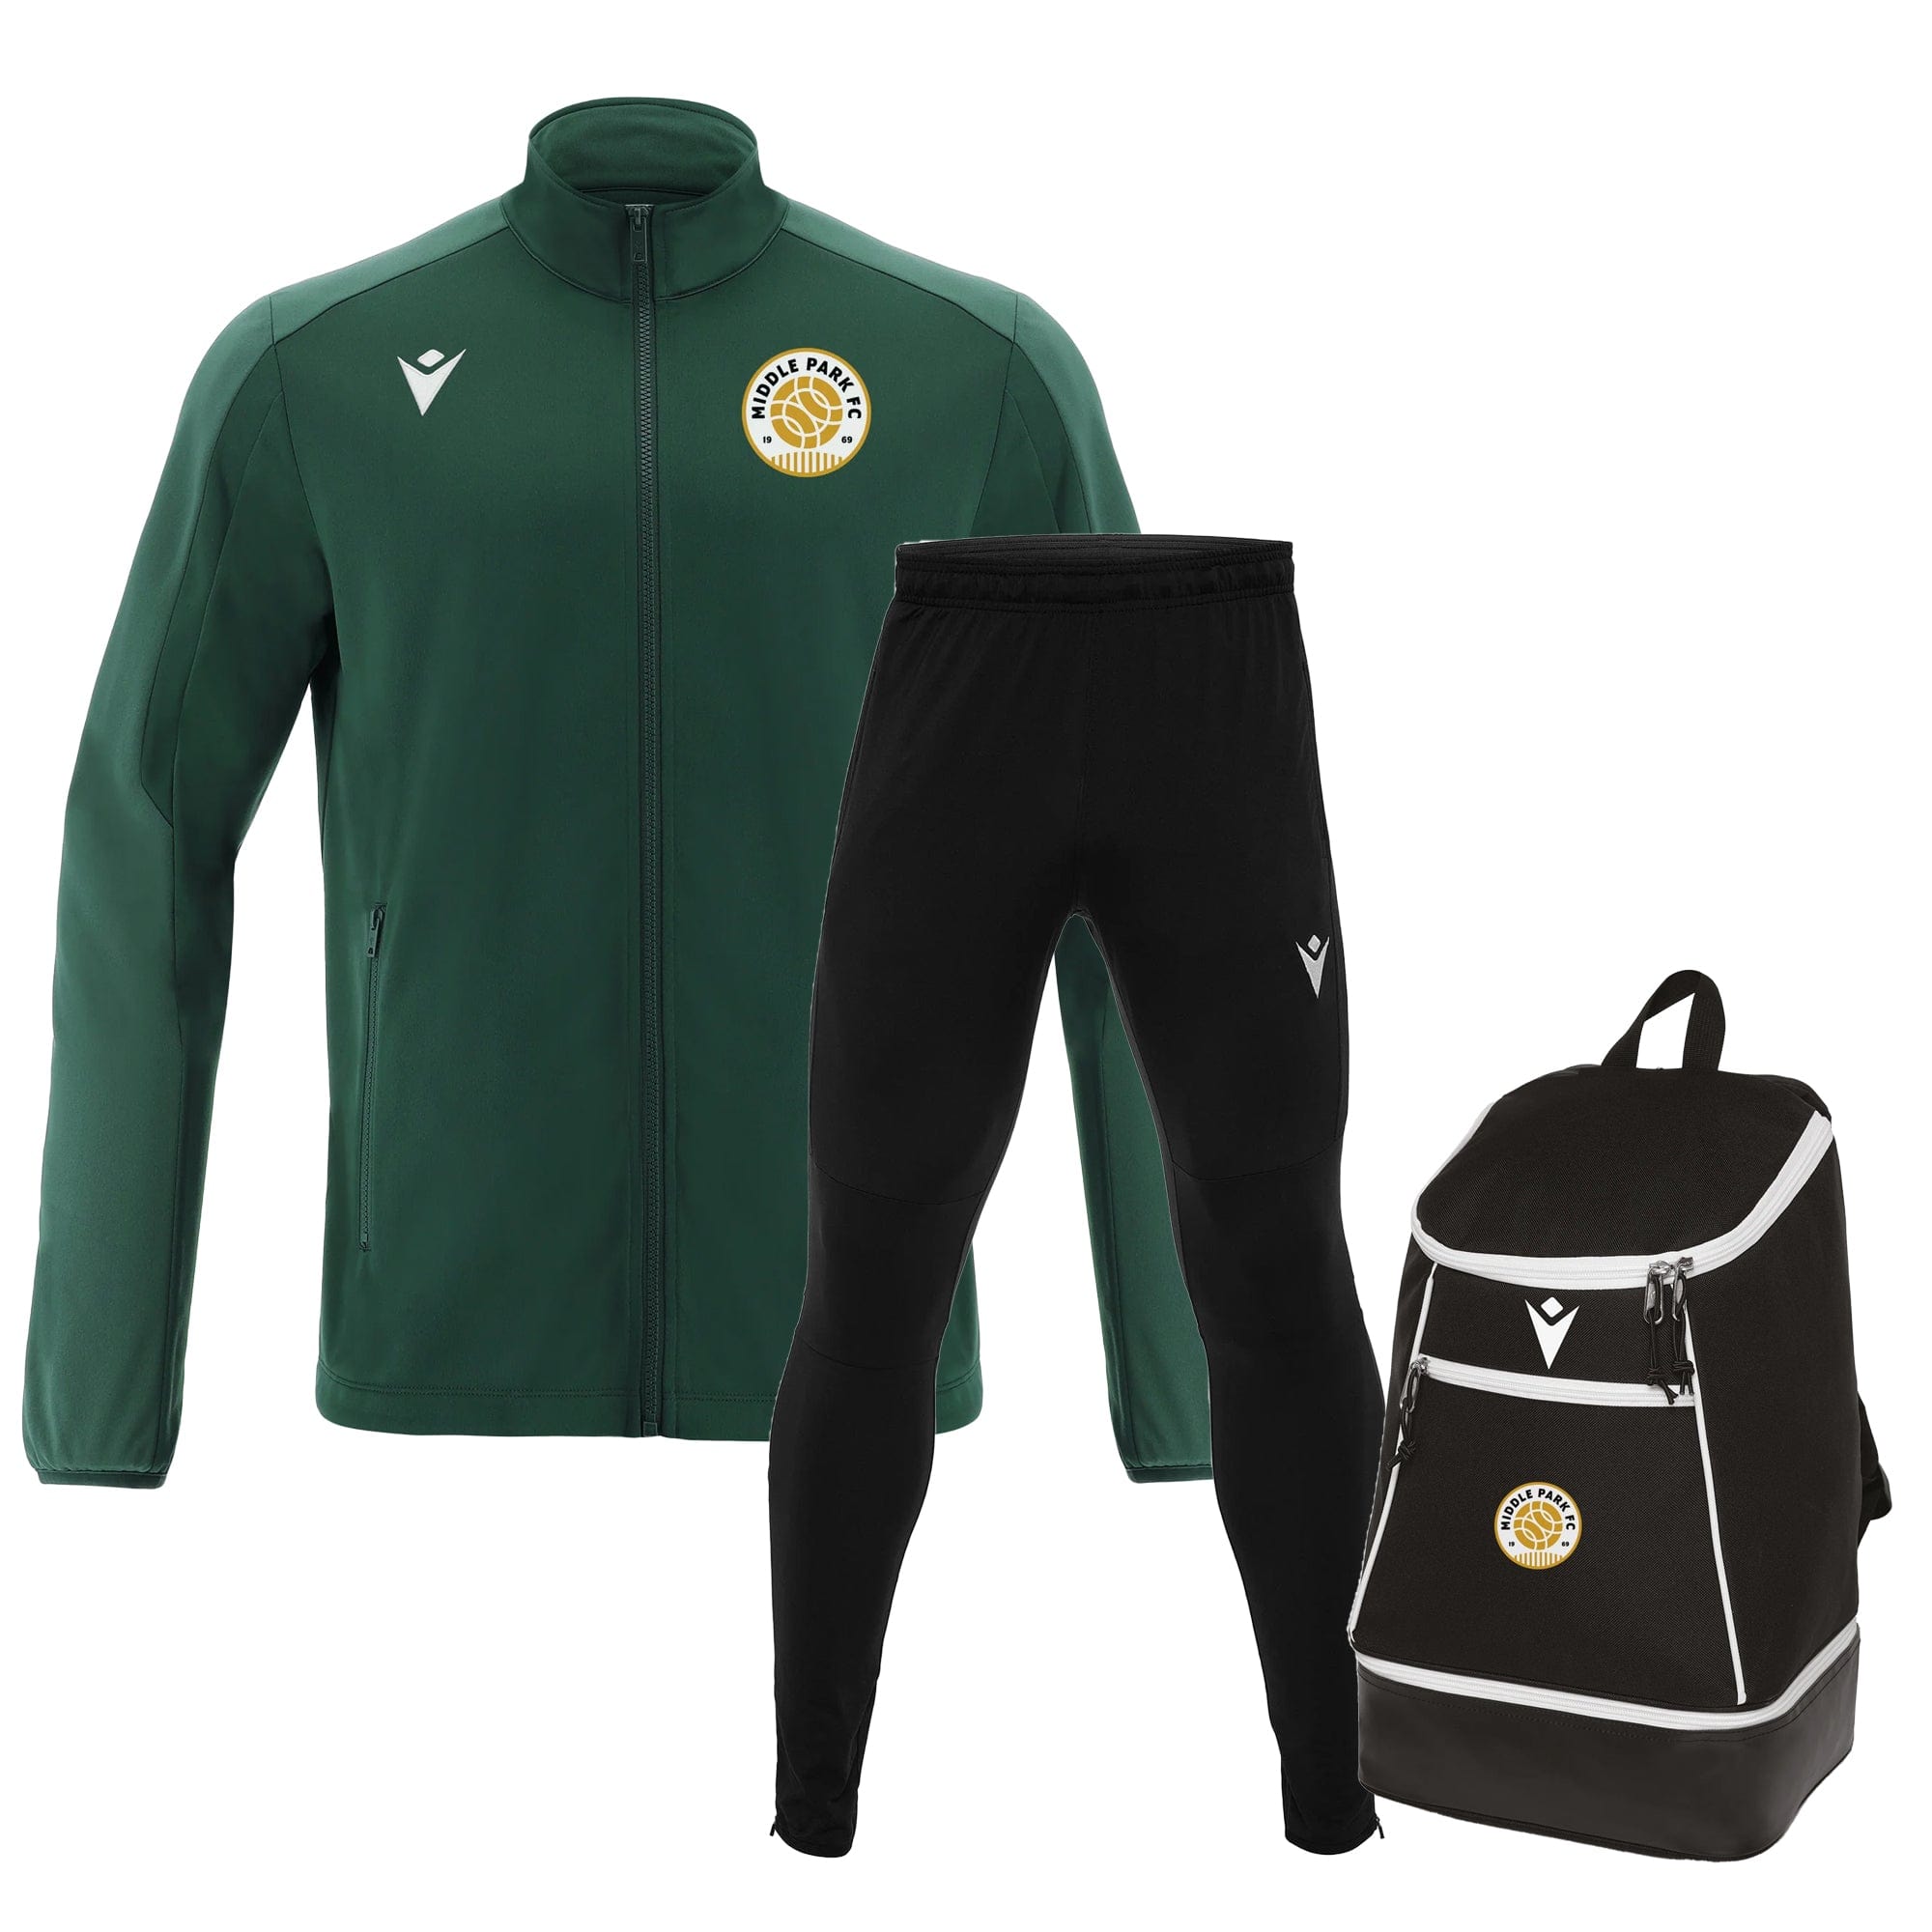 MPFC TRACKSUIT + BACKPACK